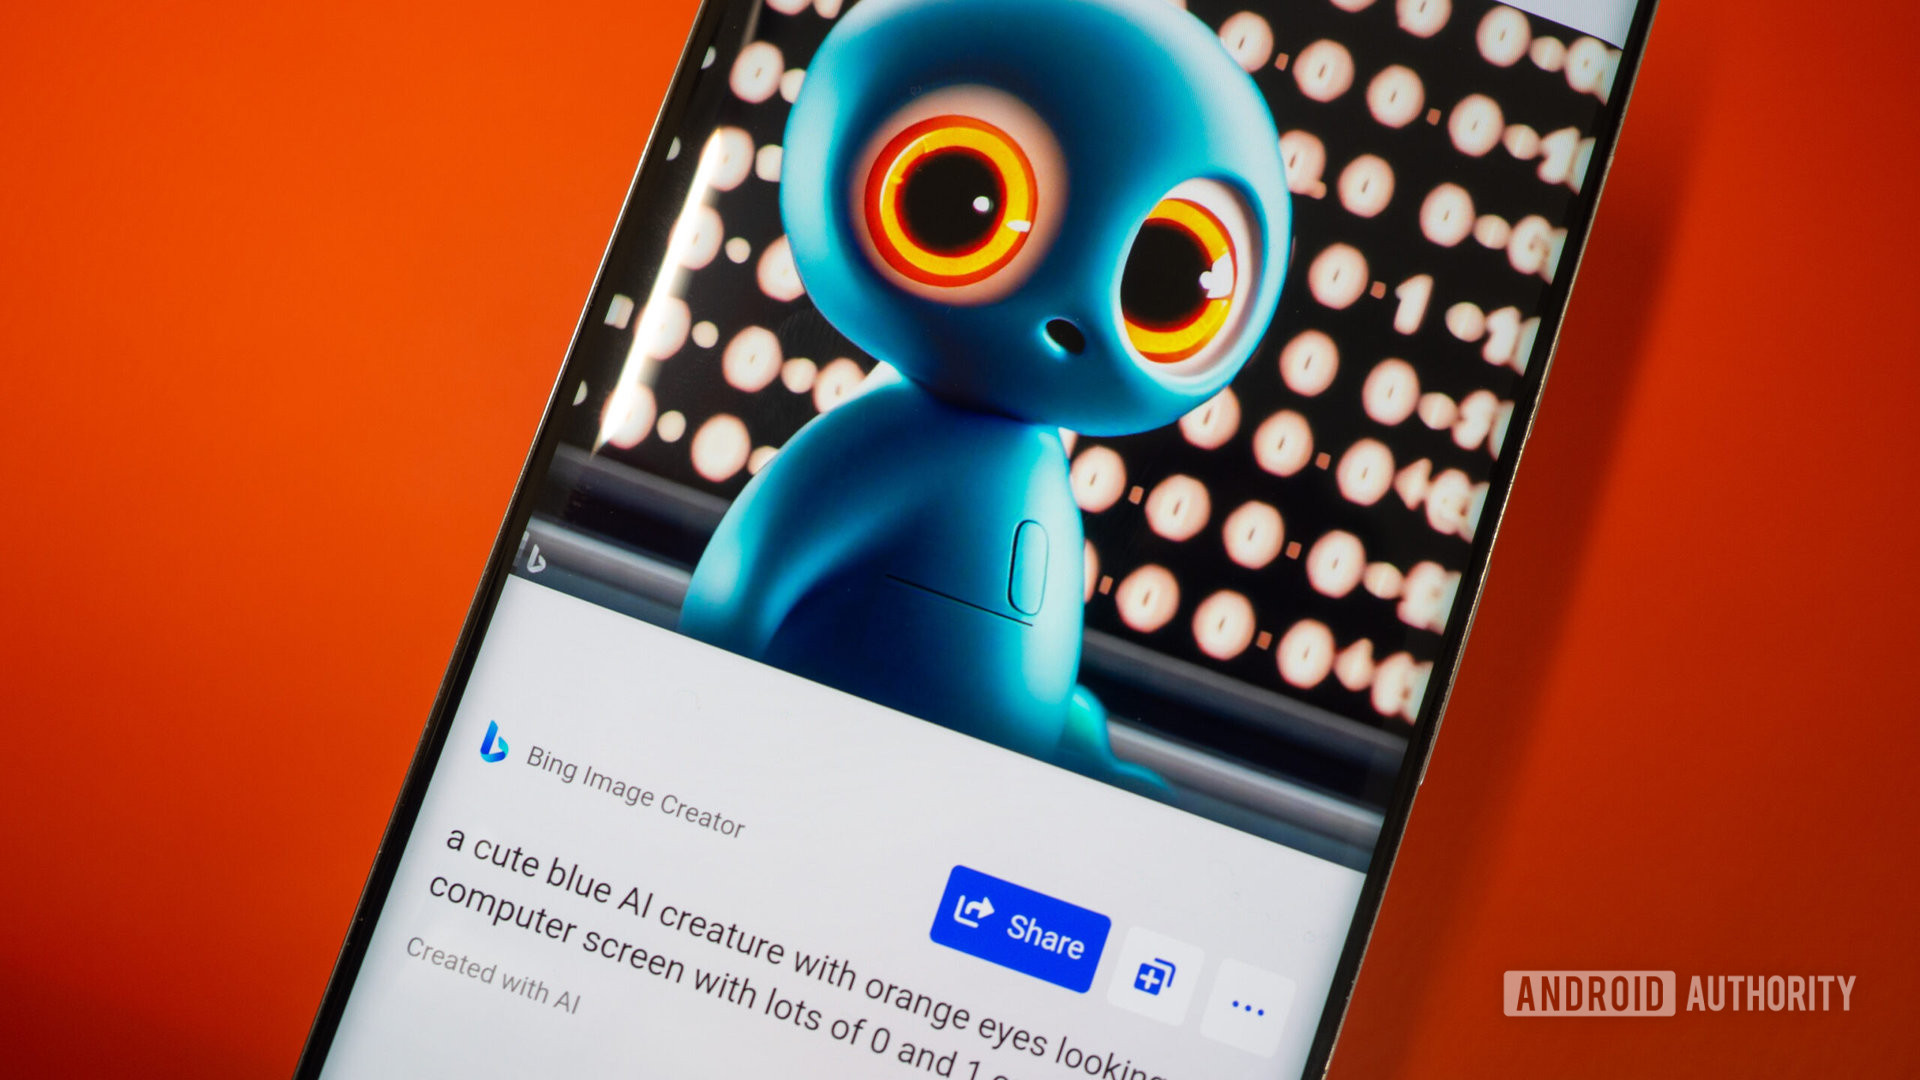 Bing Image Creator on a phone showing one image of a blue AI creature with orange eyes in front of a display with zeros and ones